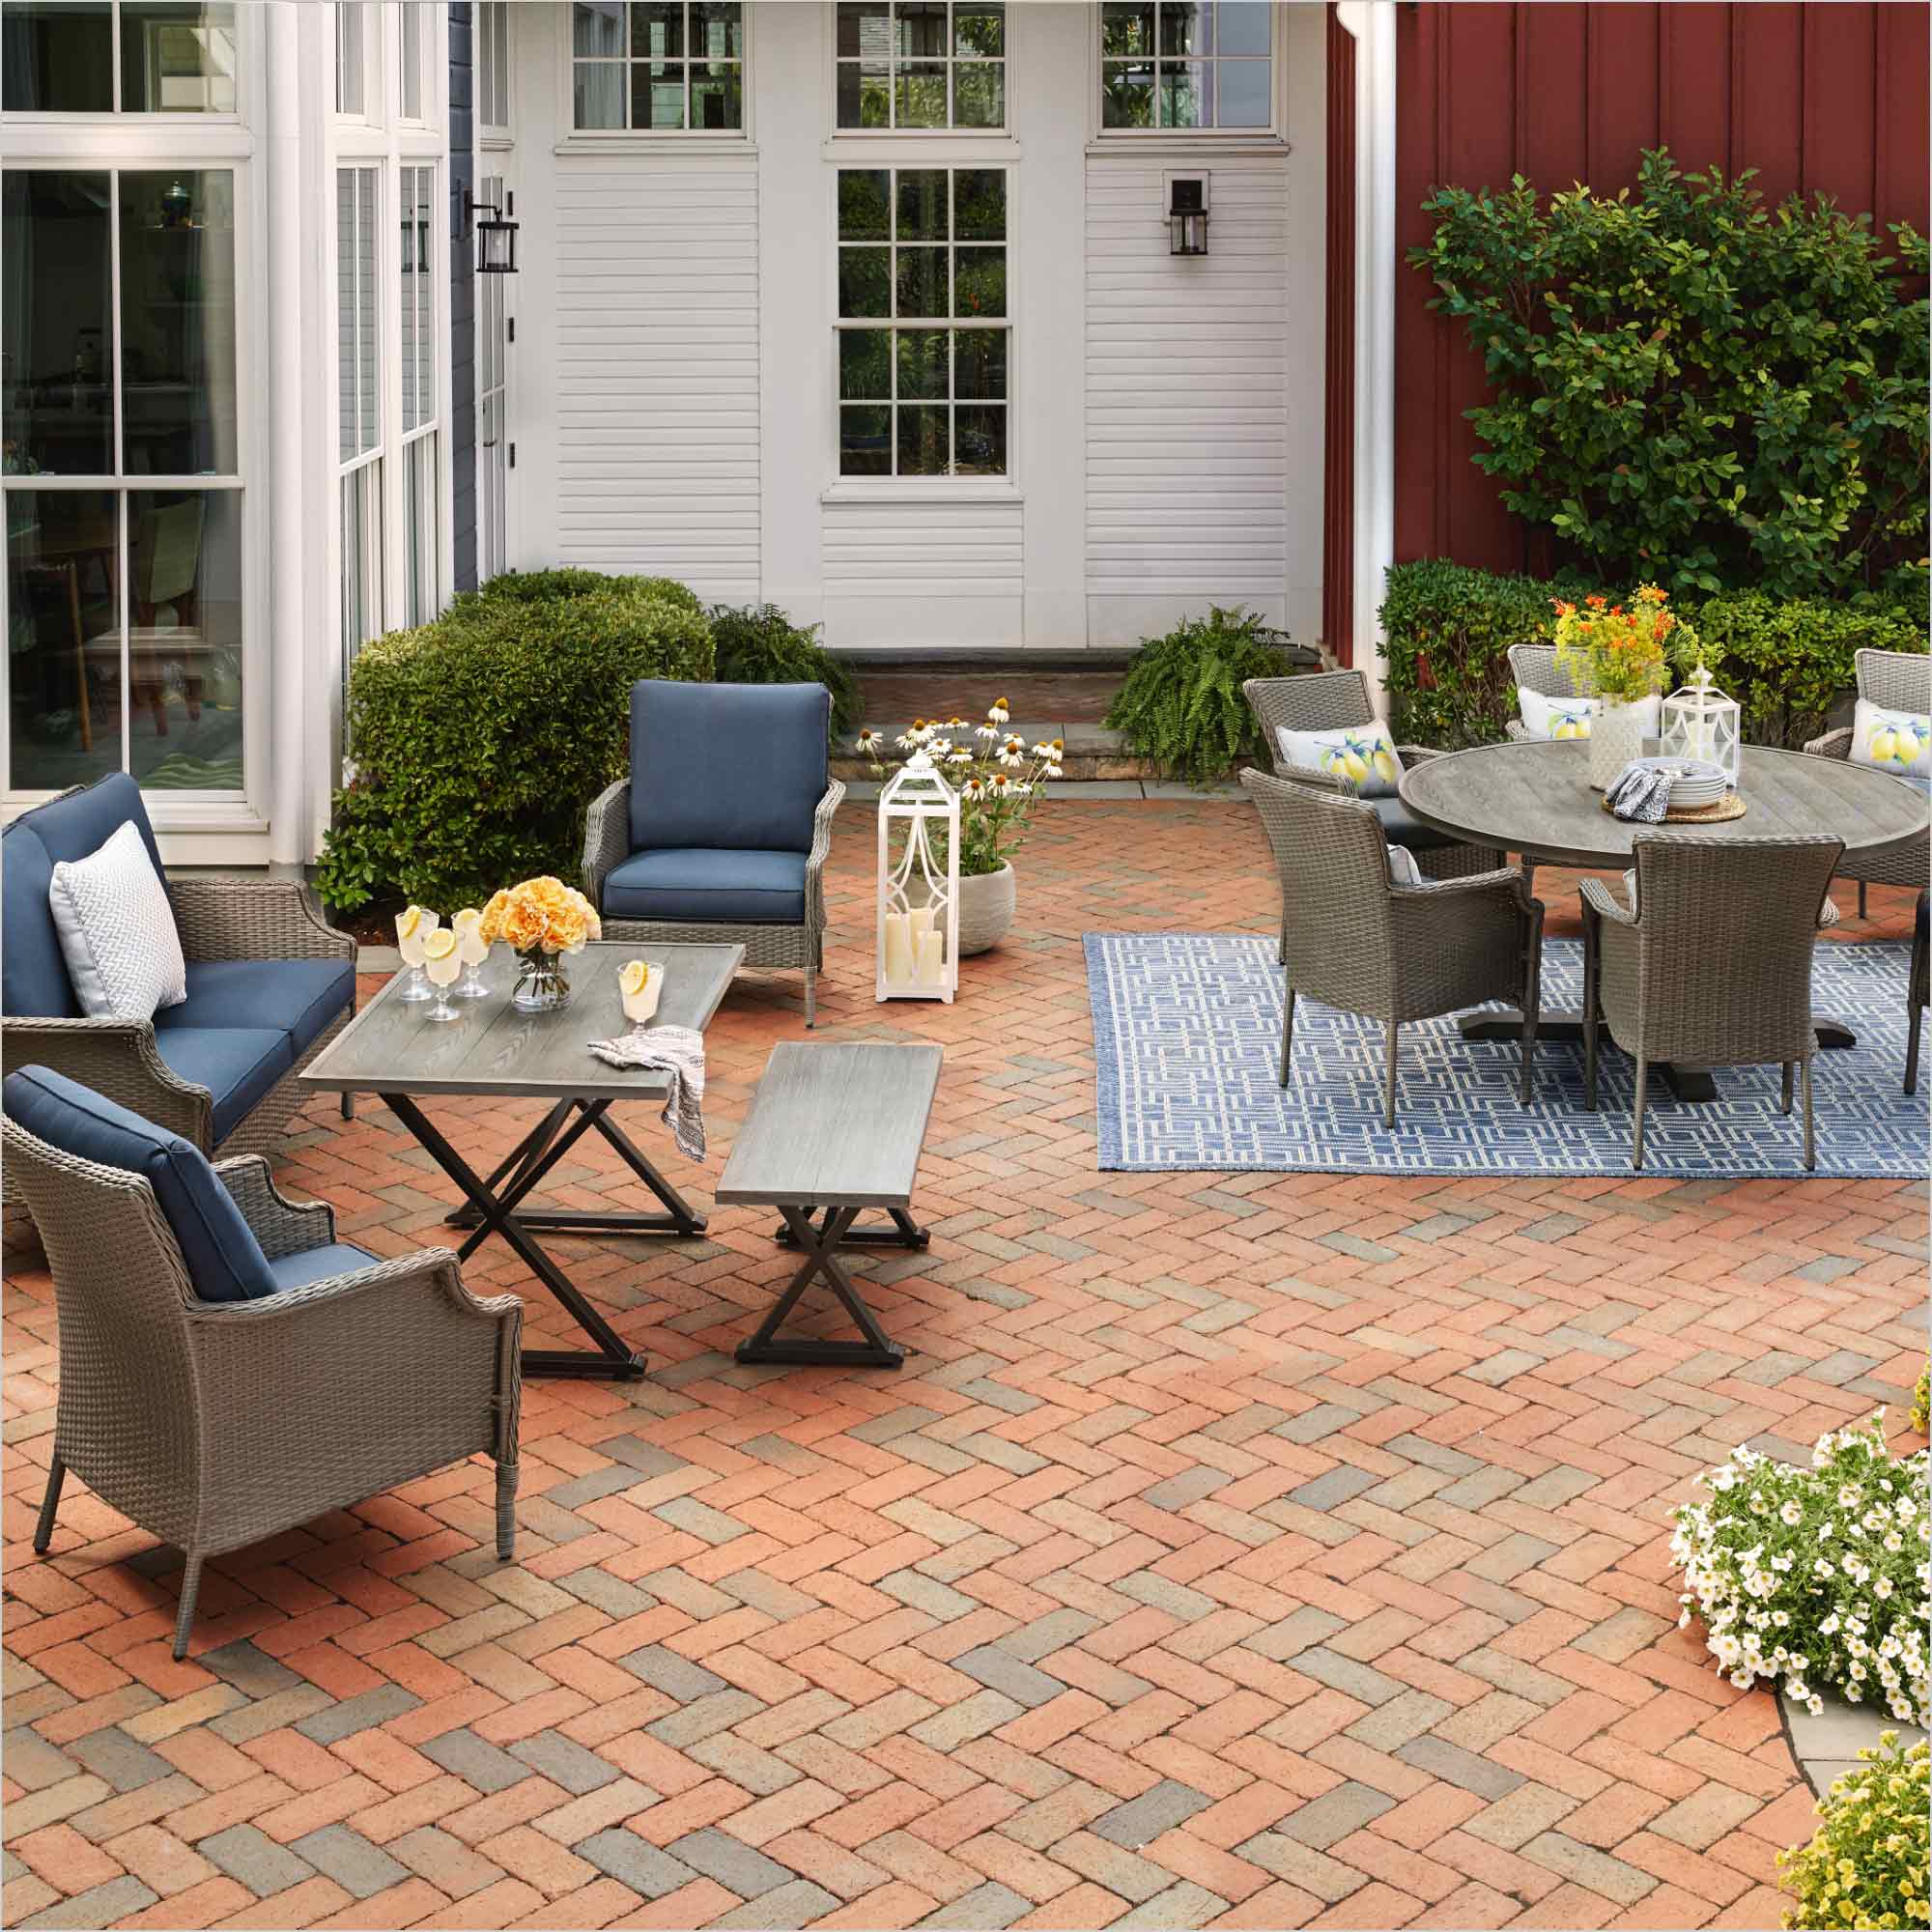 Brick Patio Patterns Your Customers Will Love - The Home Depot